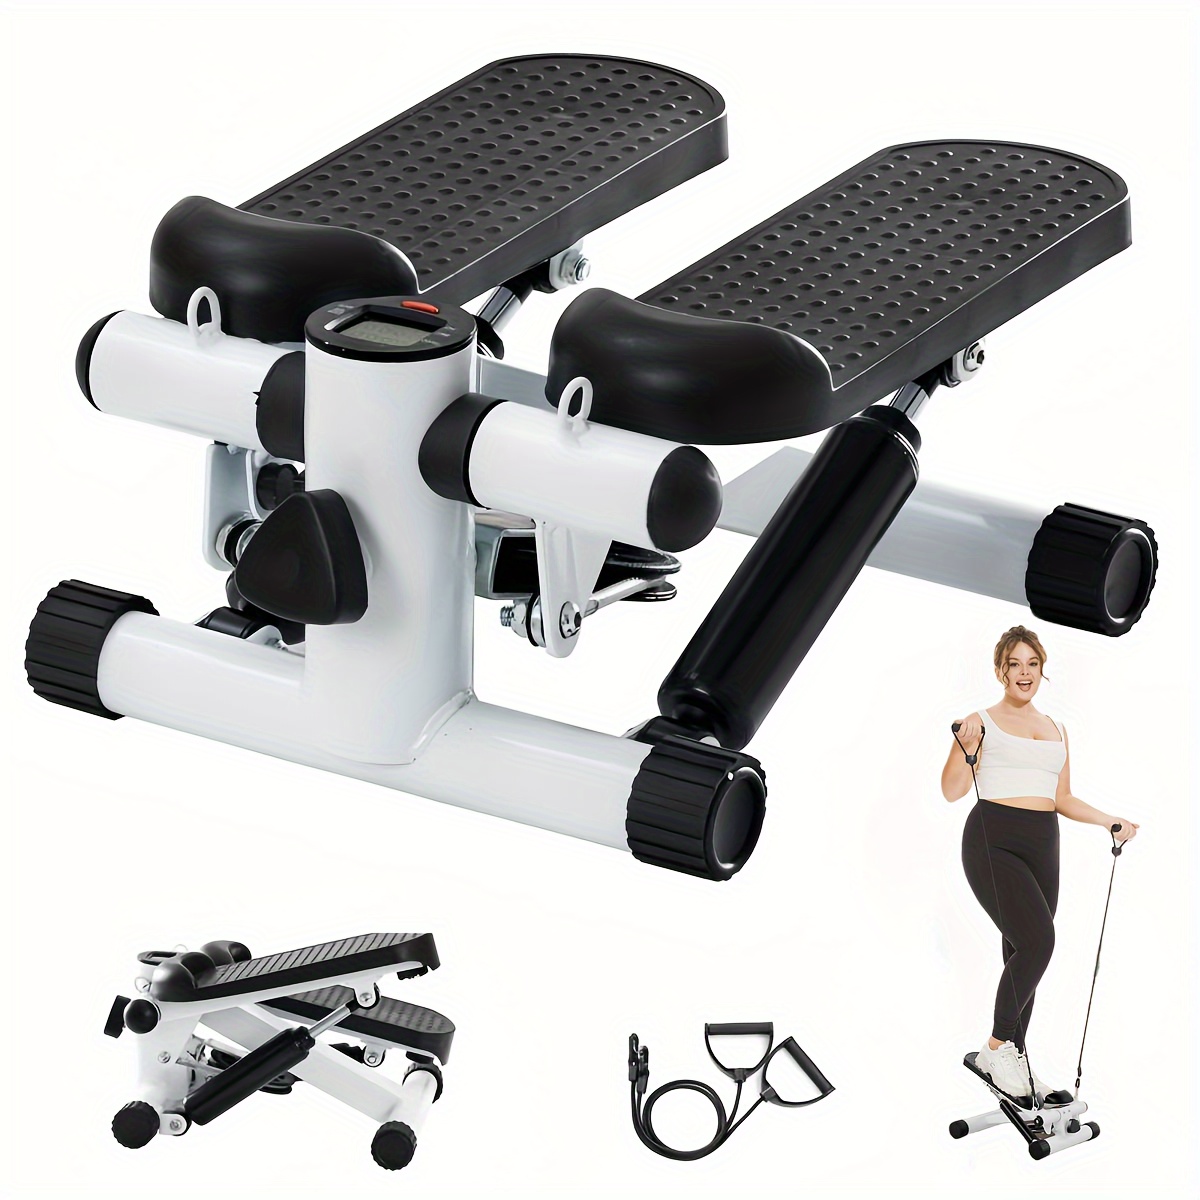 

1pc Mini Fitness Stepper With , Fitness Pedal Exerciser, Home Workout Equipment For Full Body Workout